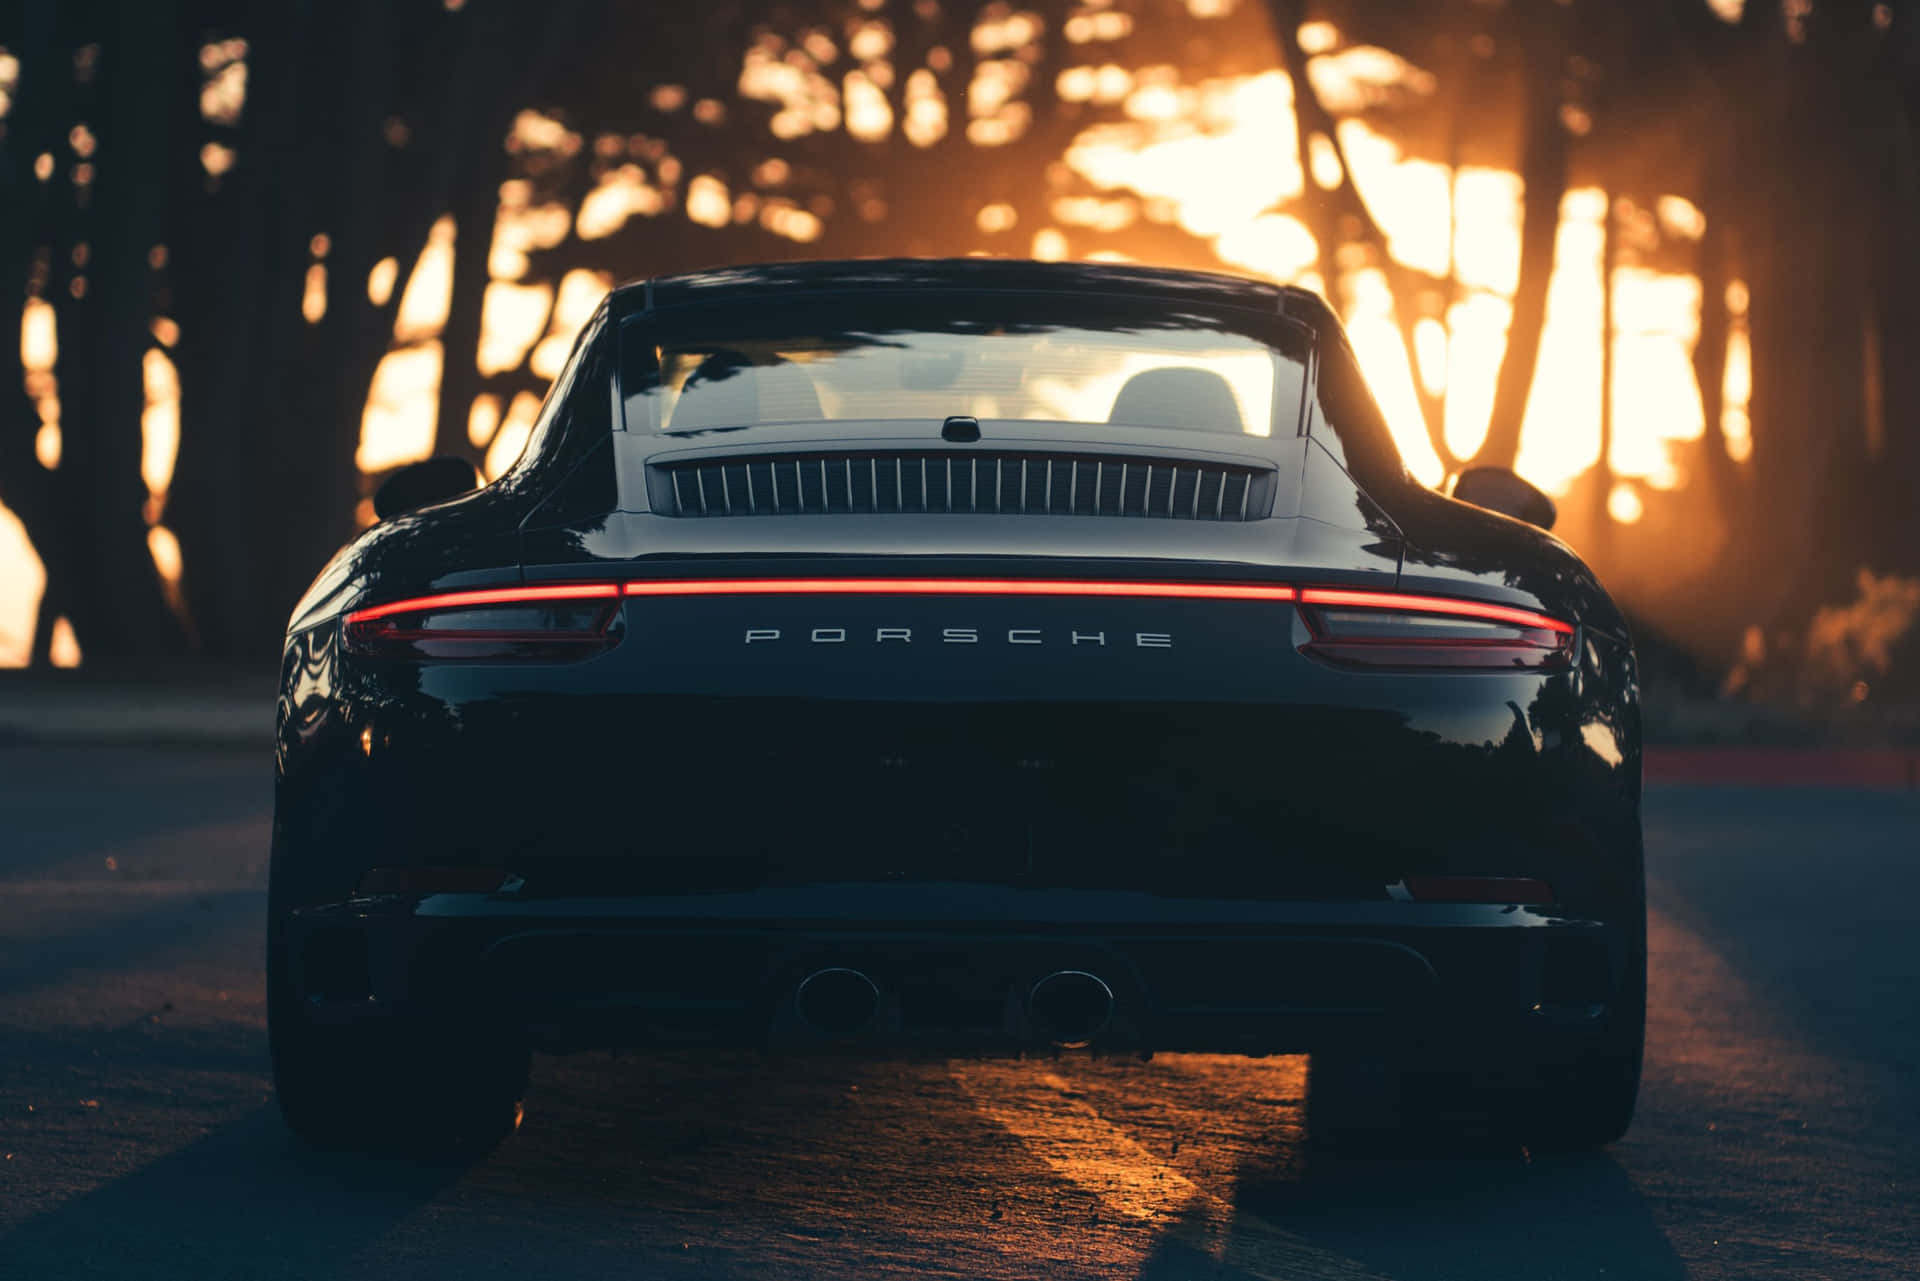 Porsche 911 Carrera on the road at sunset